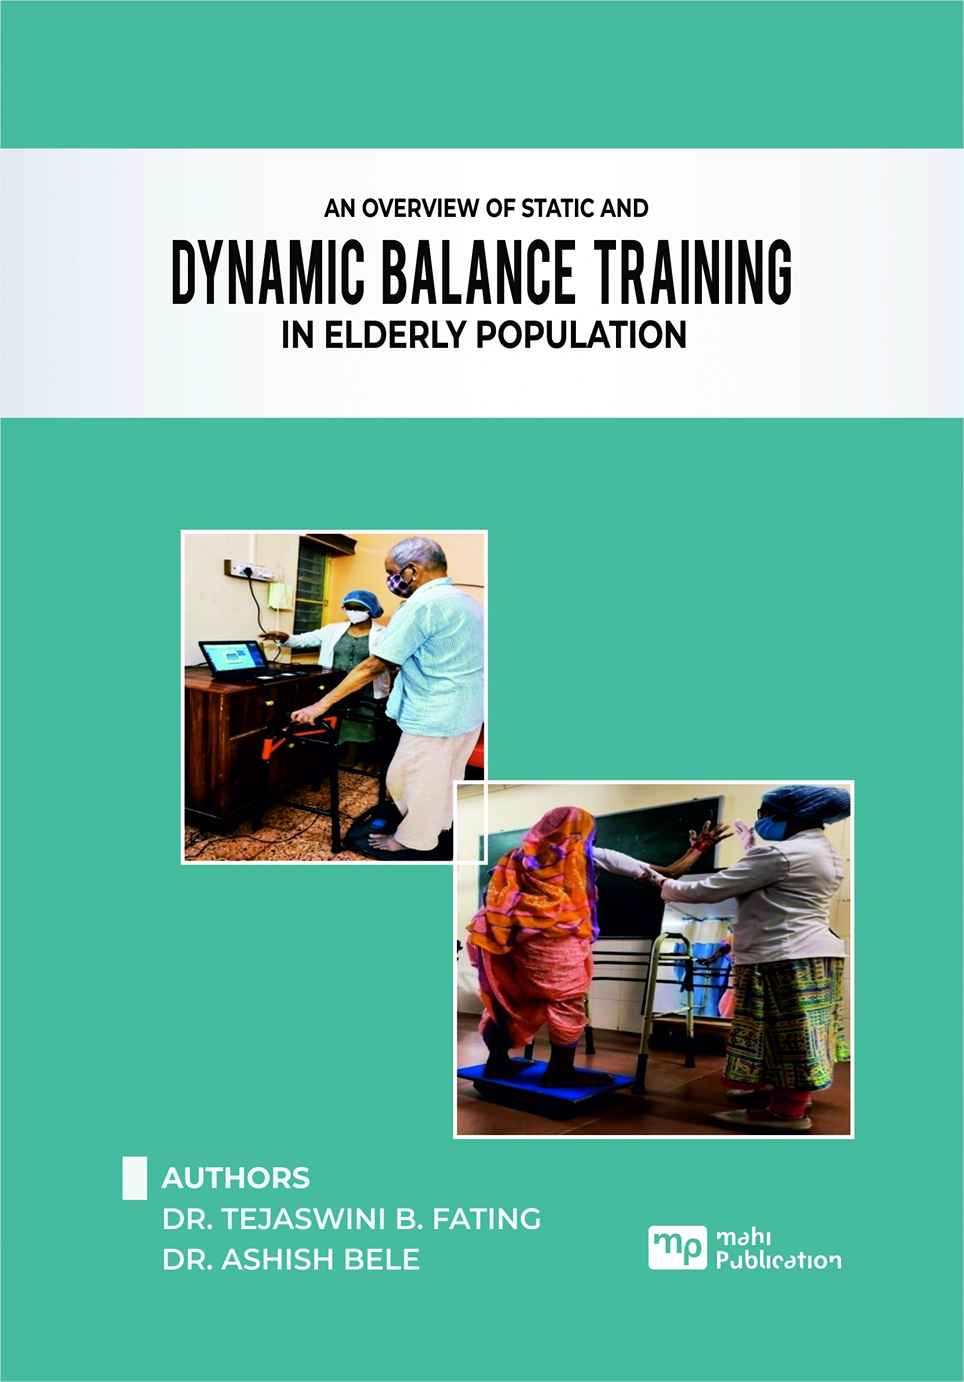 An Overview of Static and Dynamic Balance Training in Elderly Population